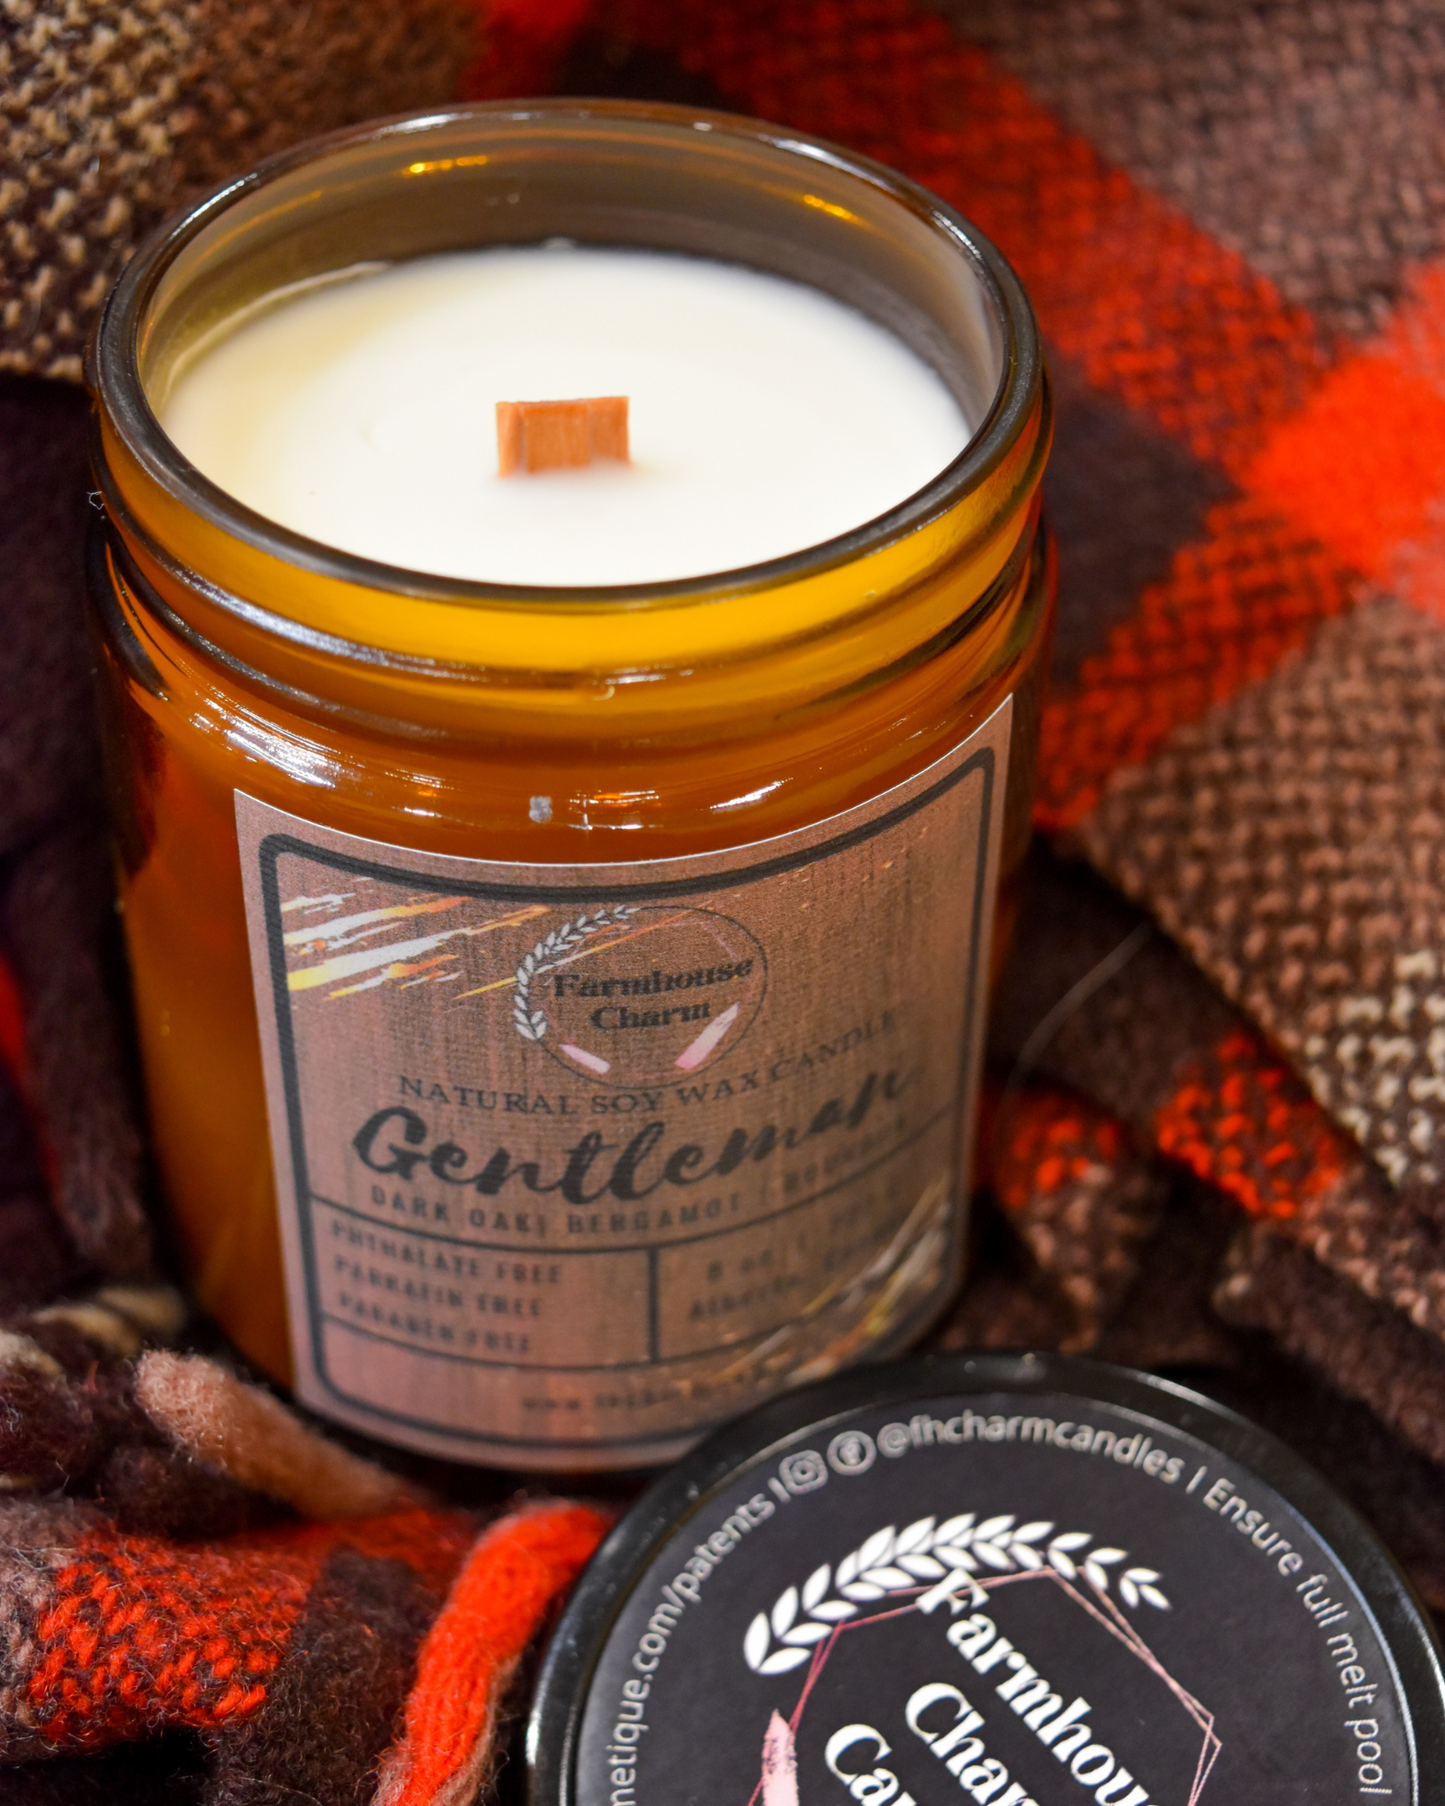 Get ready to light up your life with the suave and irresistible Gentleman - Farmhouse Charm Soy Candle. Packed with the aromatic power of dark oak, bergamot, and a hint of bourbon, this candle is like the ultimate wingman for your home. The dark oak aroma brings a touch of the outdoors inside, while the bergamot adds a refreshing citrusy zing. And, oh! that hint of bourbon - it's like a warm hug from a dear friend, perfect for those snug nights in. www.farmhousecharmcandles.com